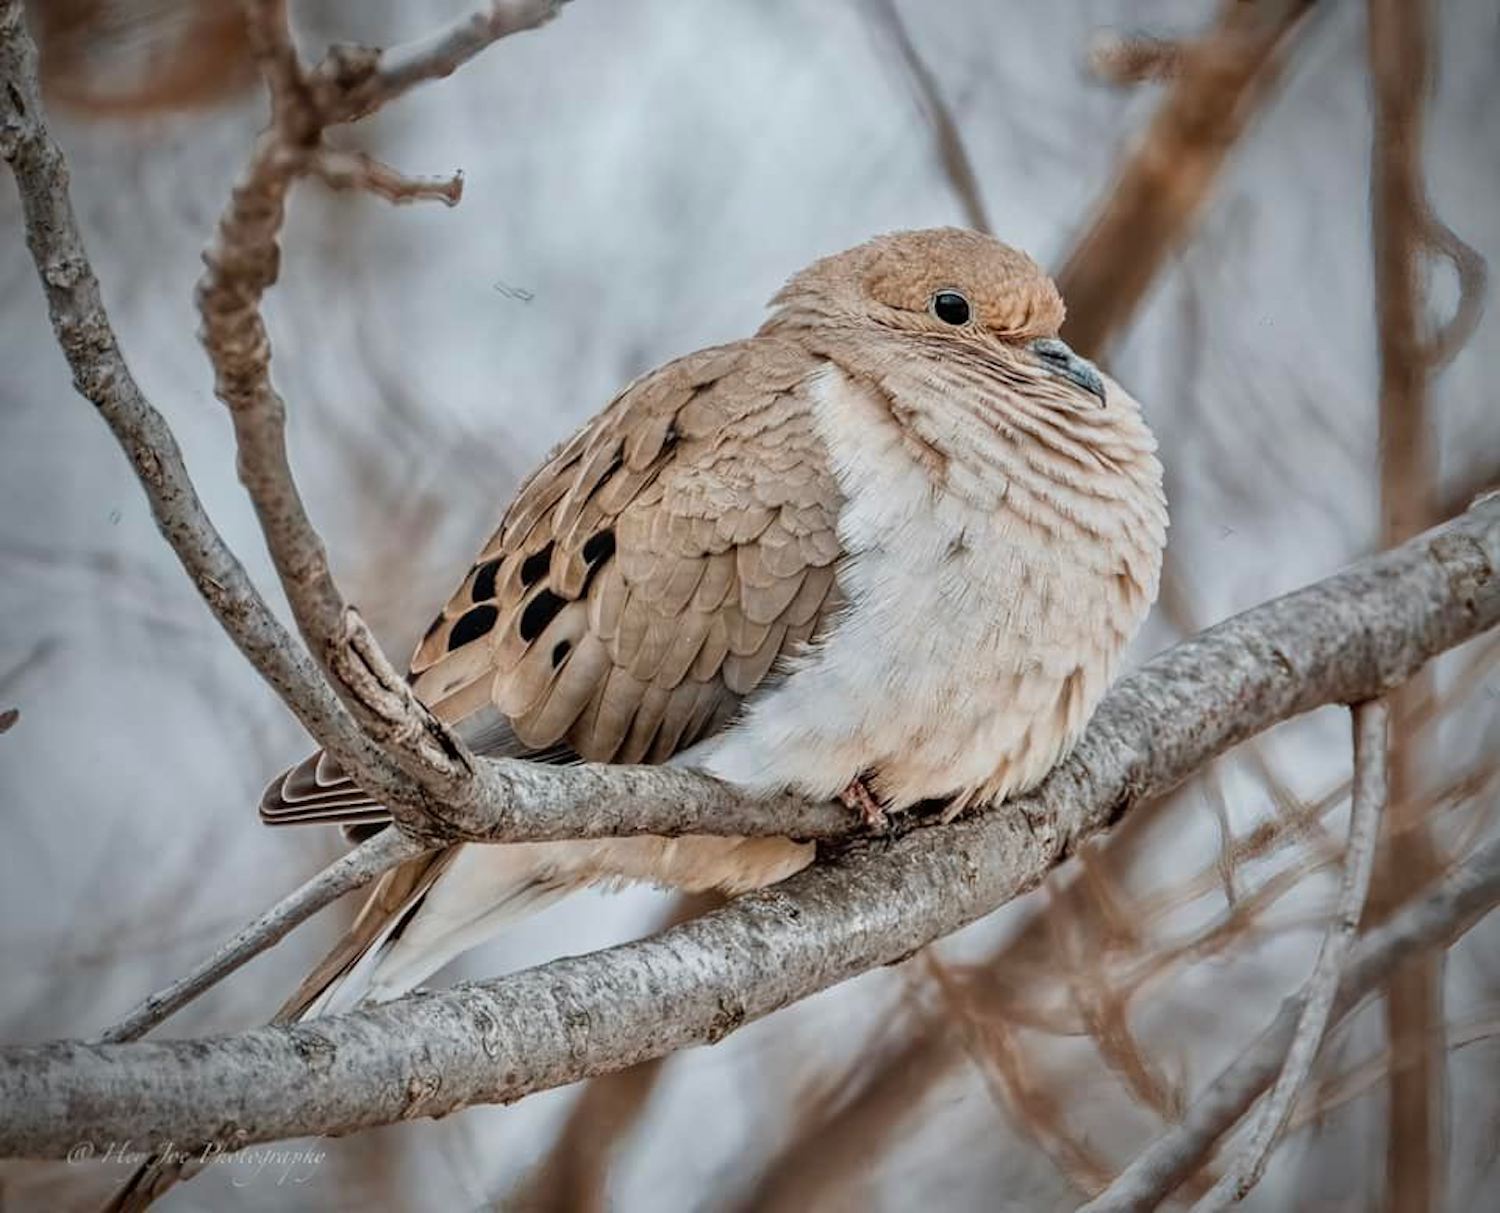 A mourning dove puffed up and perched on a bare branch.